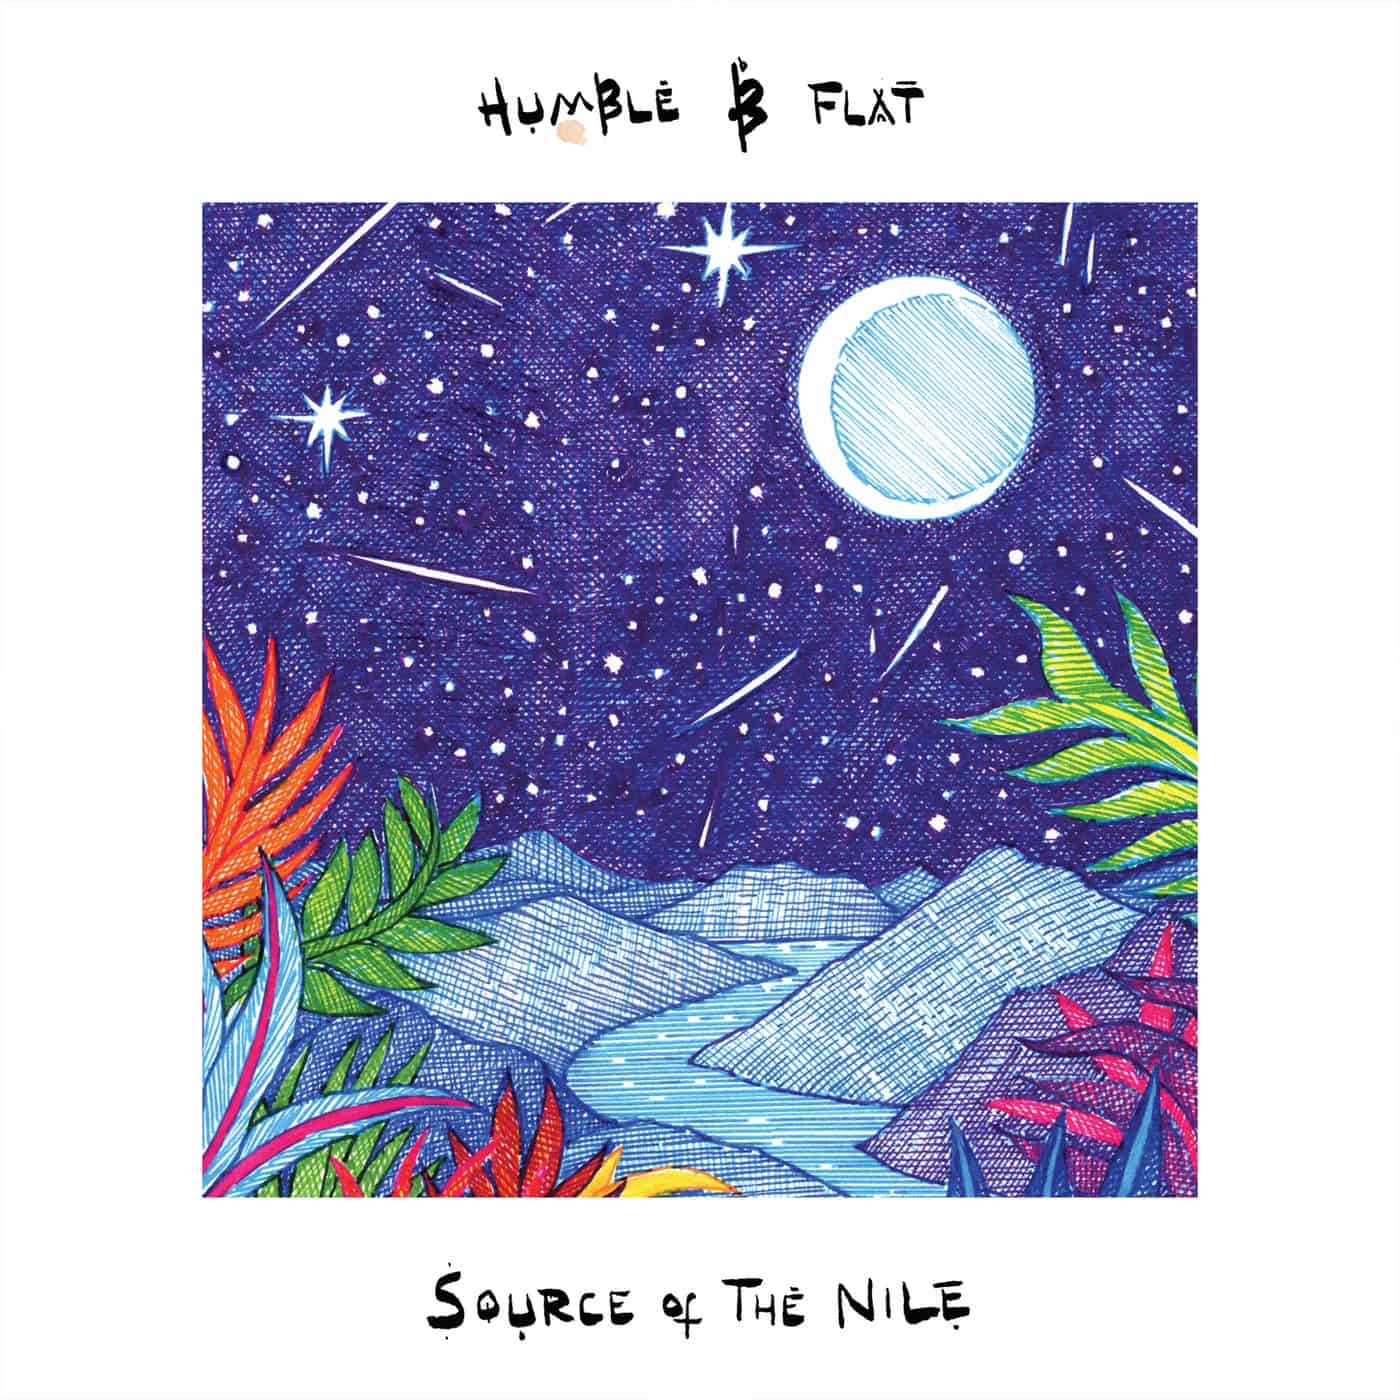 Download Humble B Flat, Lisa Toh, Tenderlonious - Source of the Nile on Electrobuzz